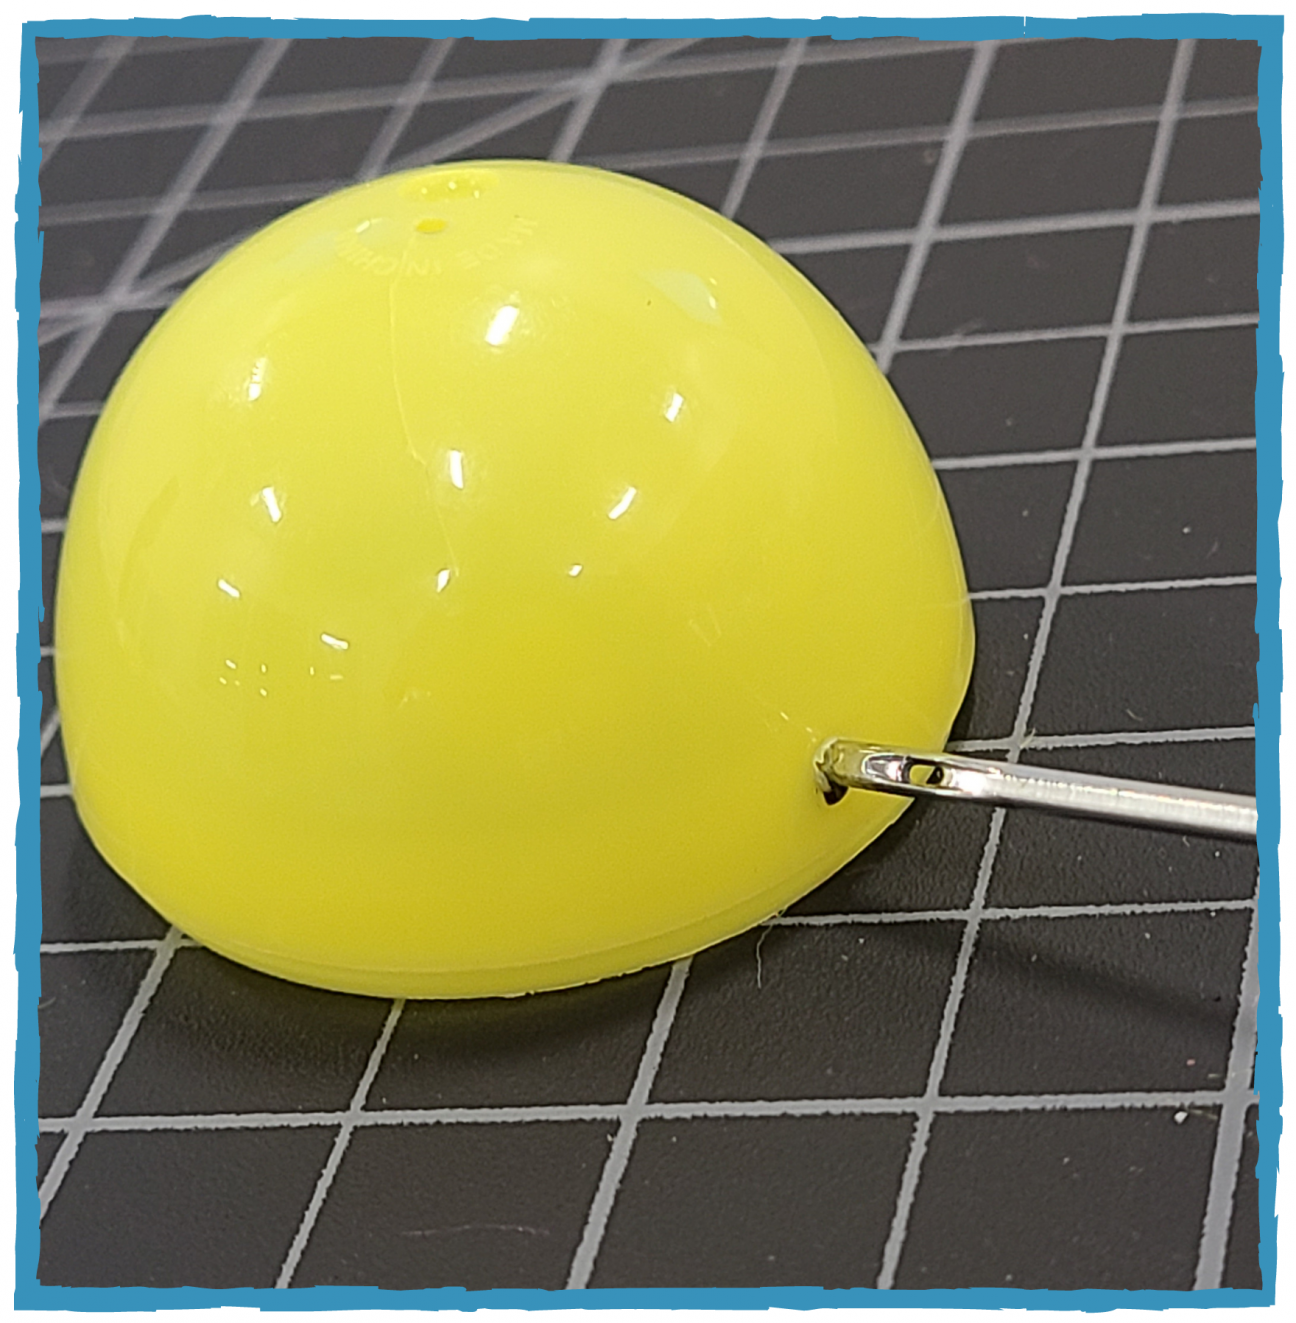 The short half of a yellow plastic egg sits on a cutting mat. There is a needle inserted into a marked hole.